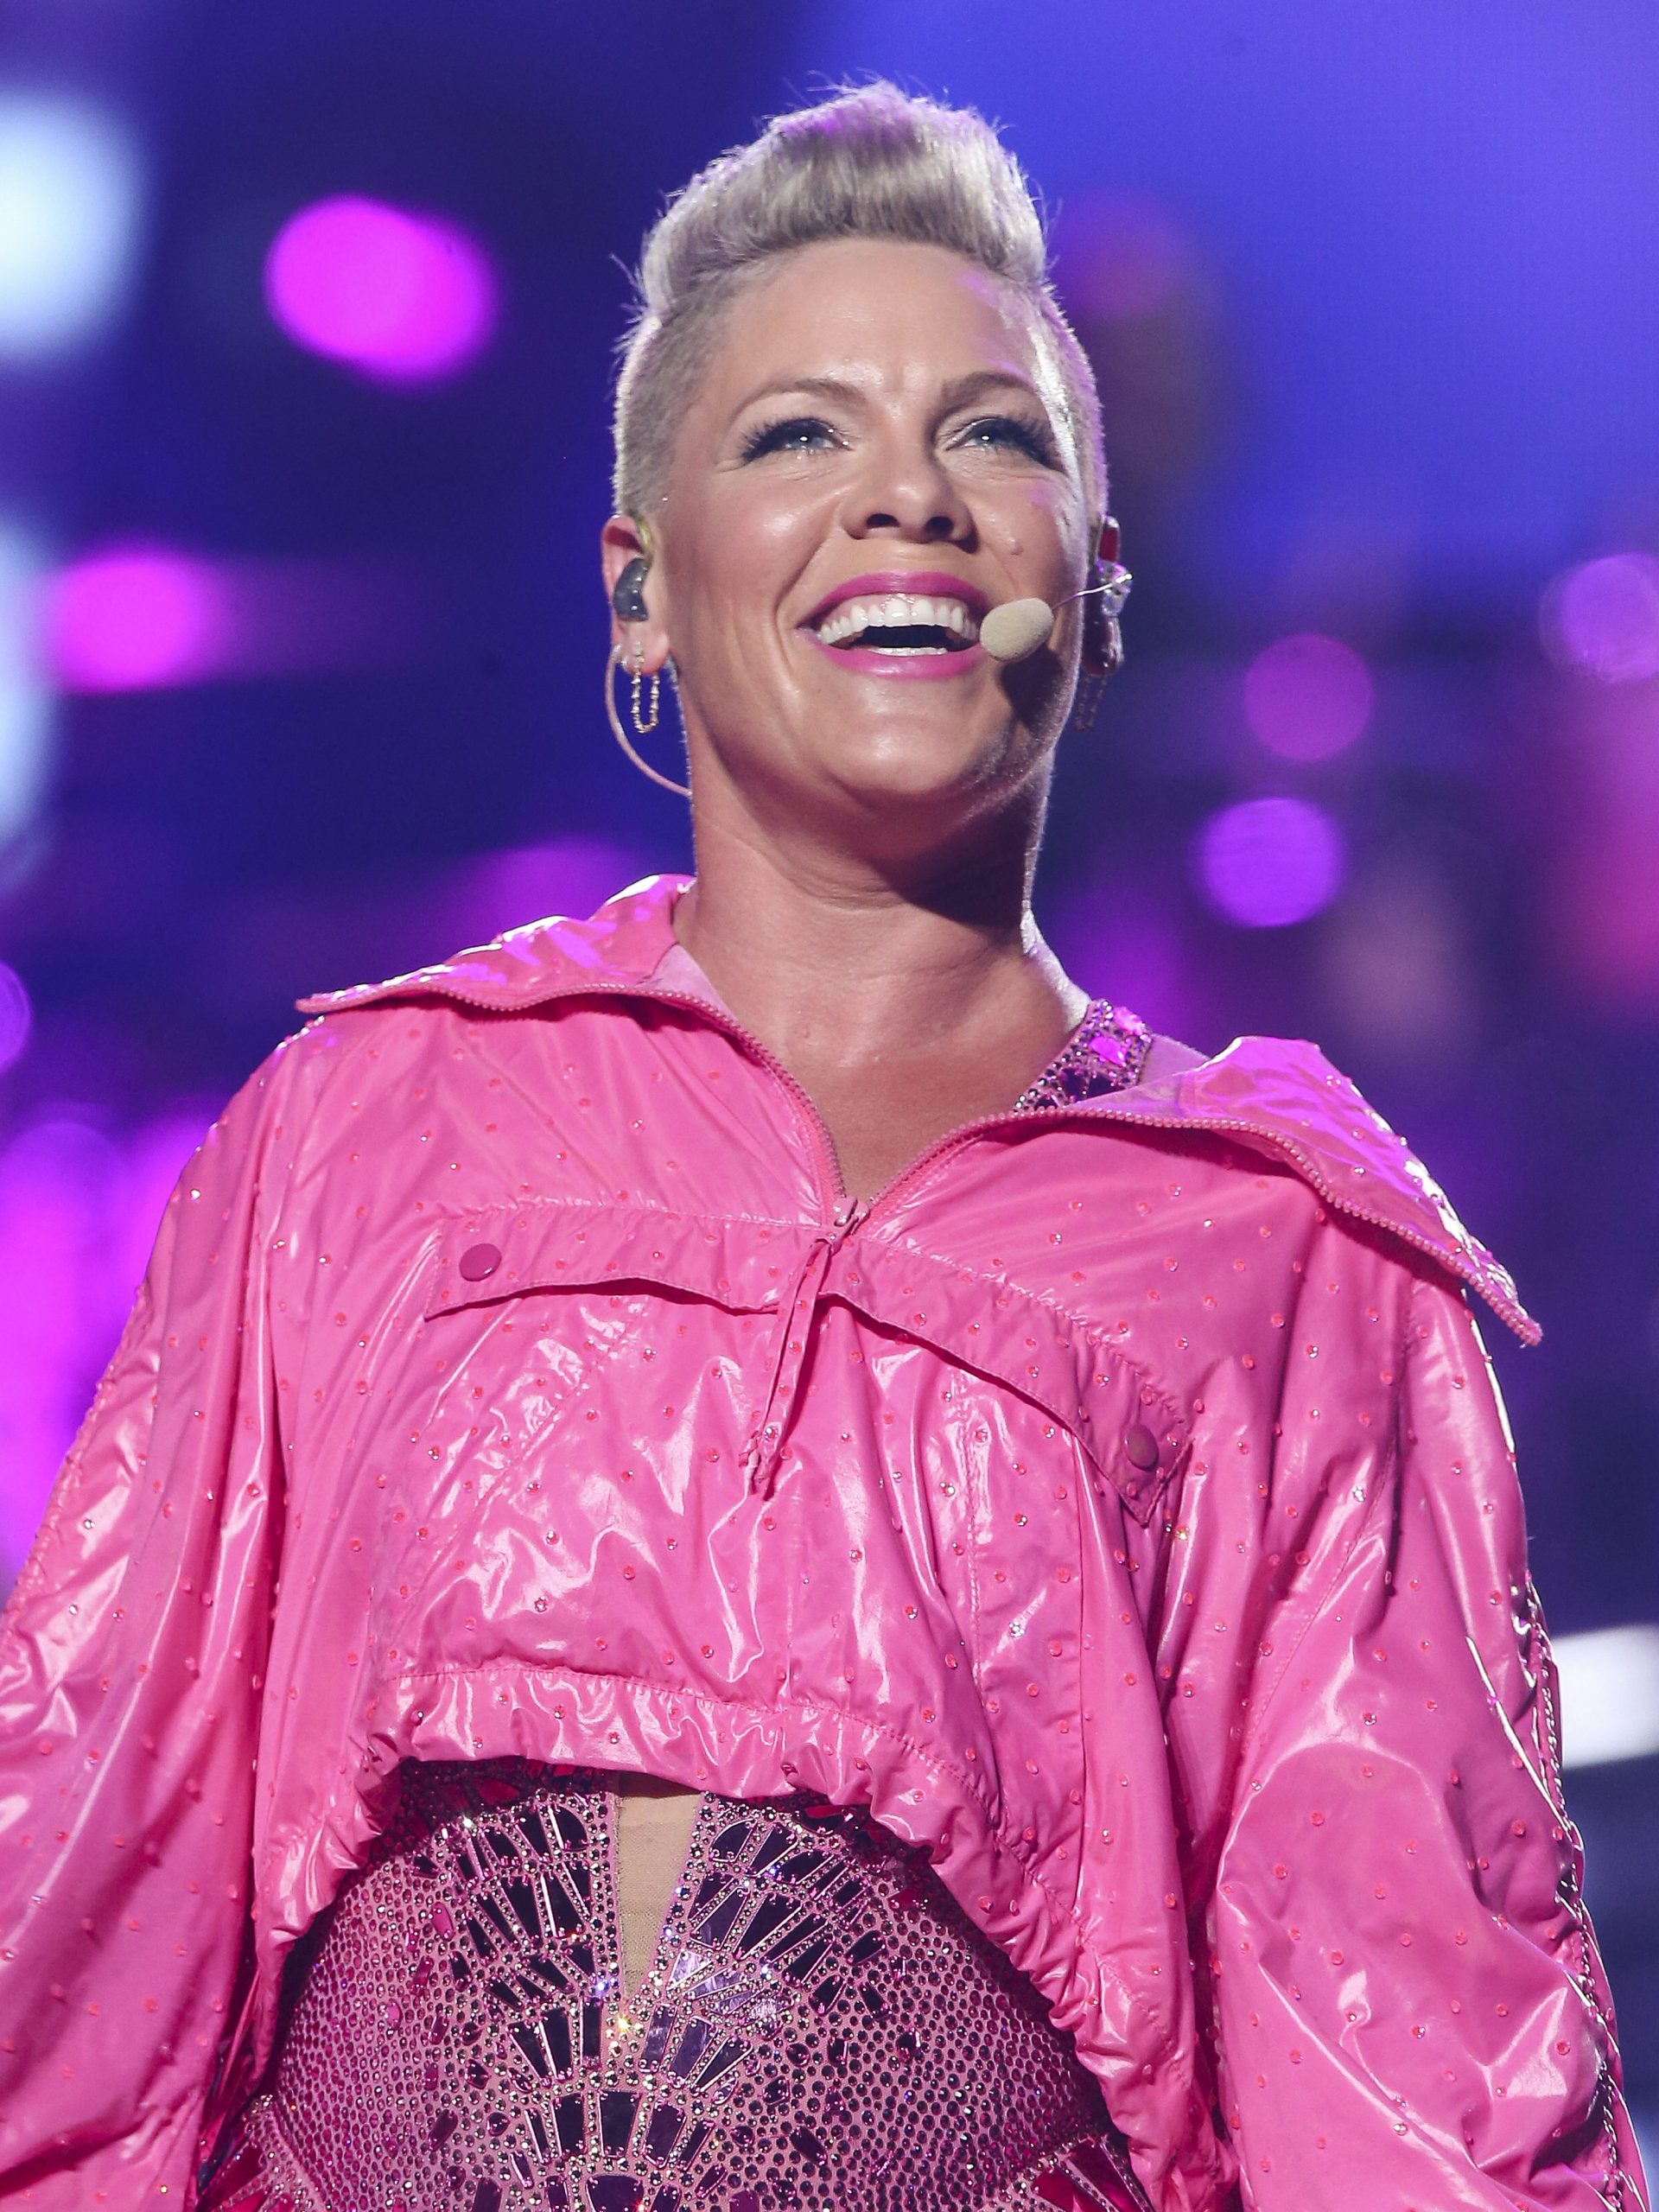 Pink fans left worried as singer cancels concert dates due to ‘family medical issues’ in emotional post